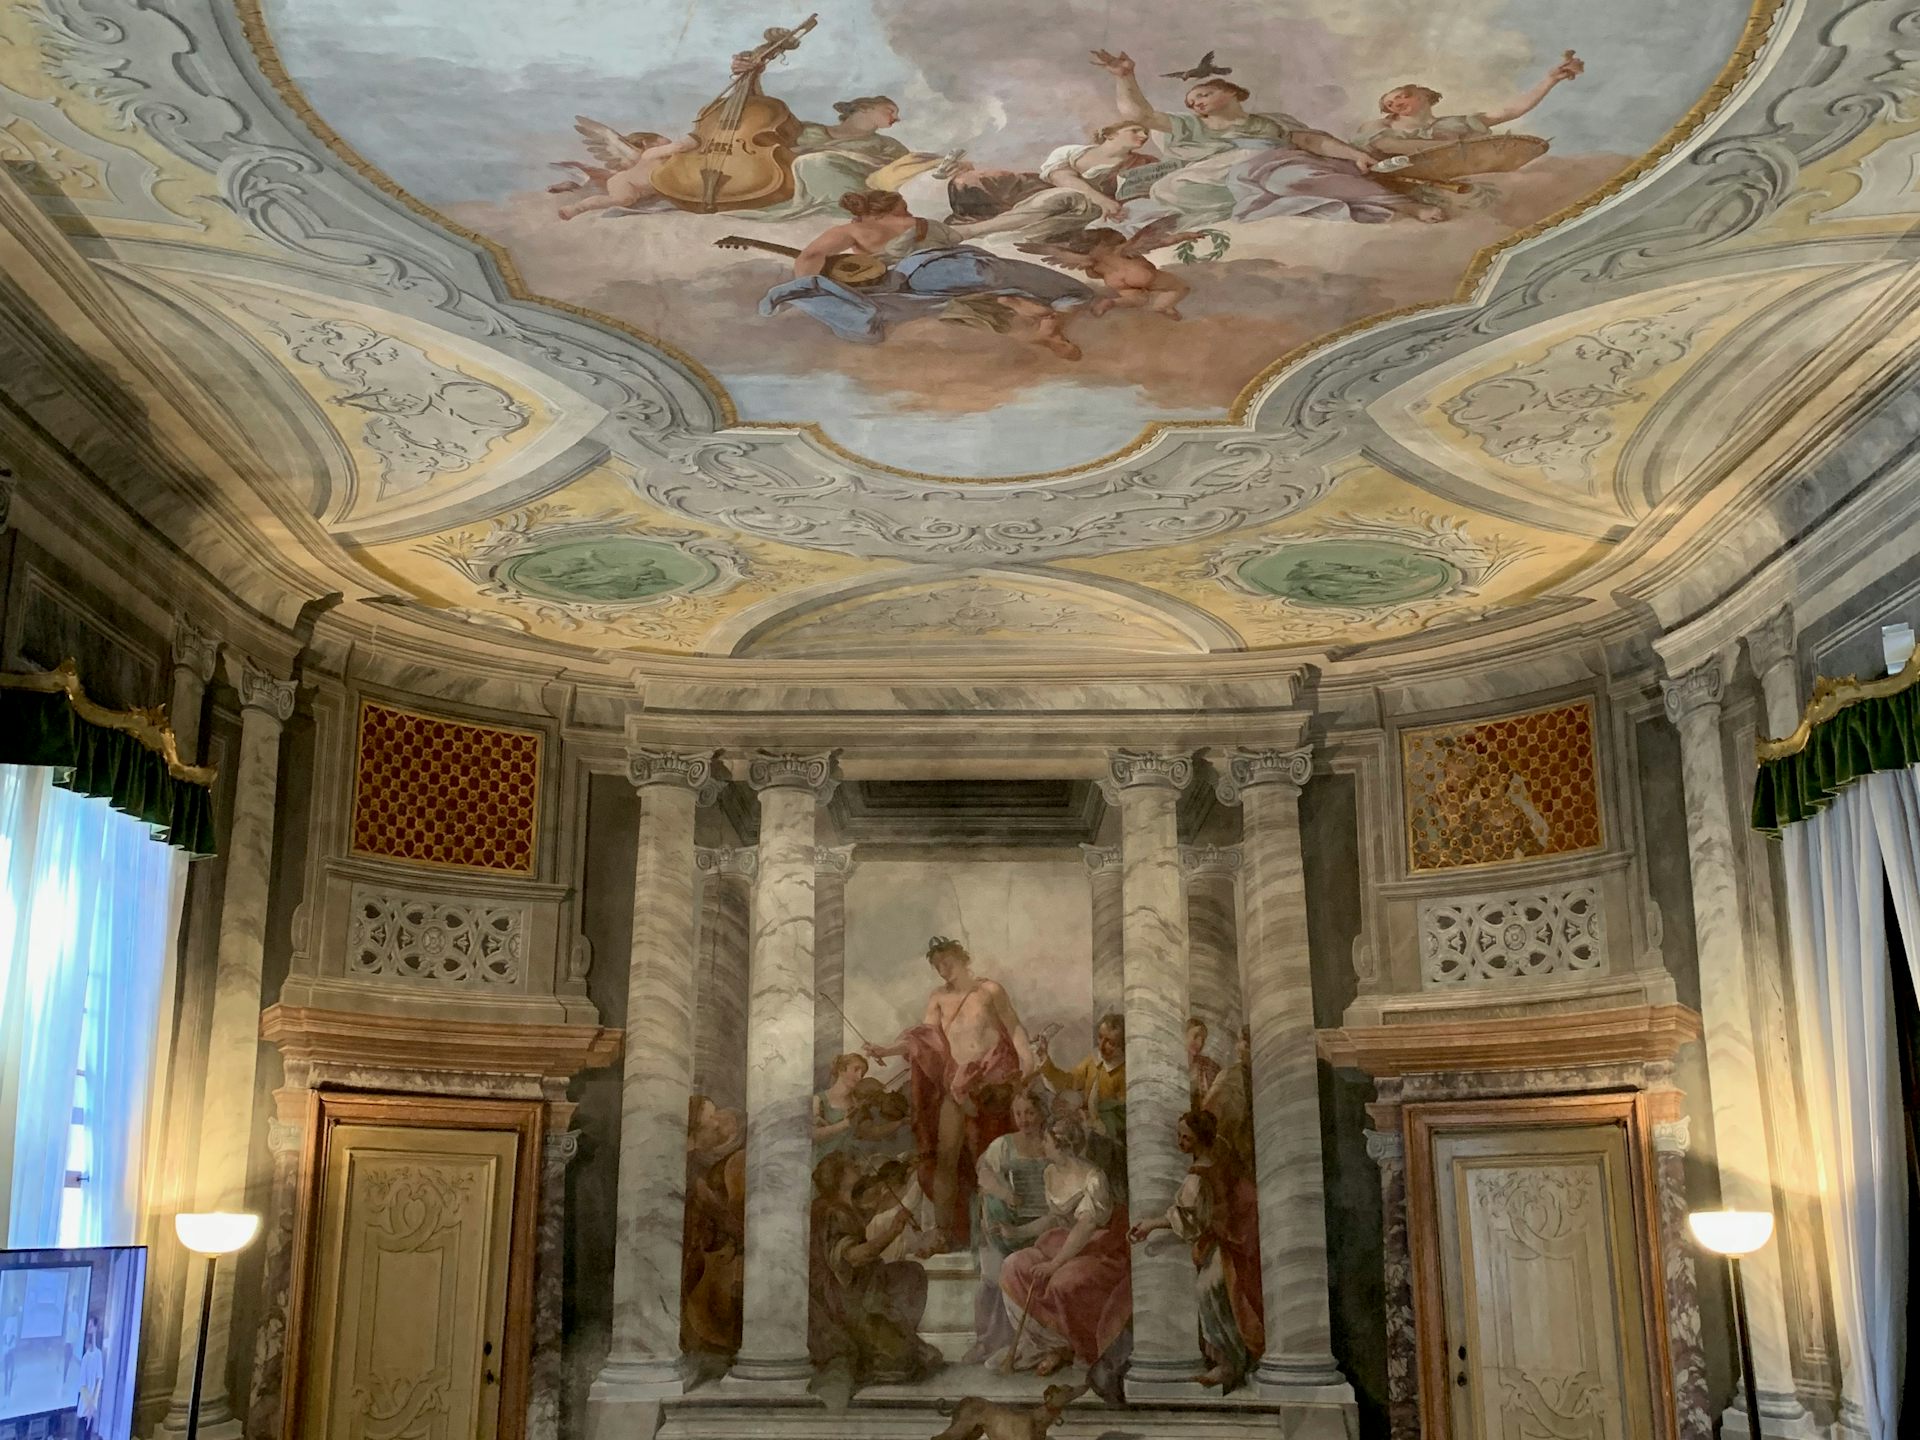 Music Painted on the Wall of a Venetian Orphanage Will Be Heard Again Nearly 250 Years Later